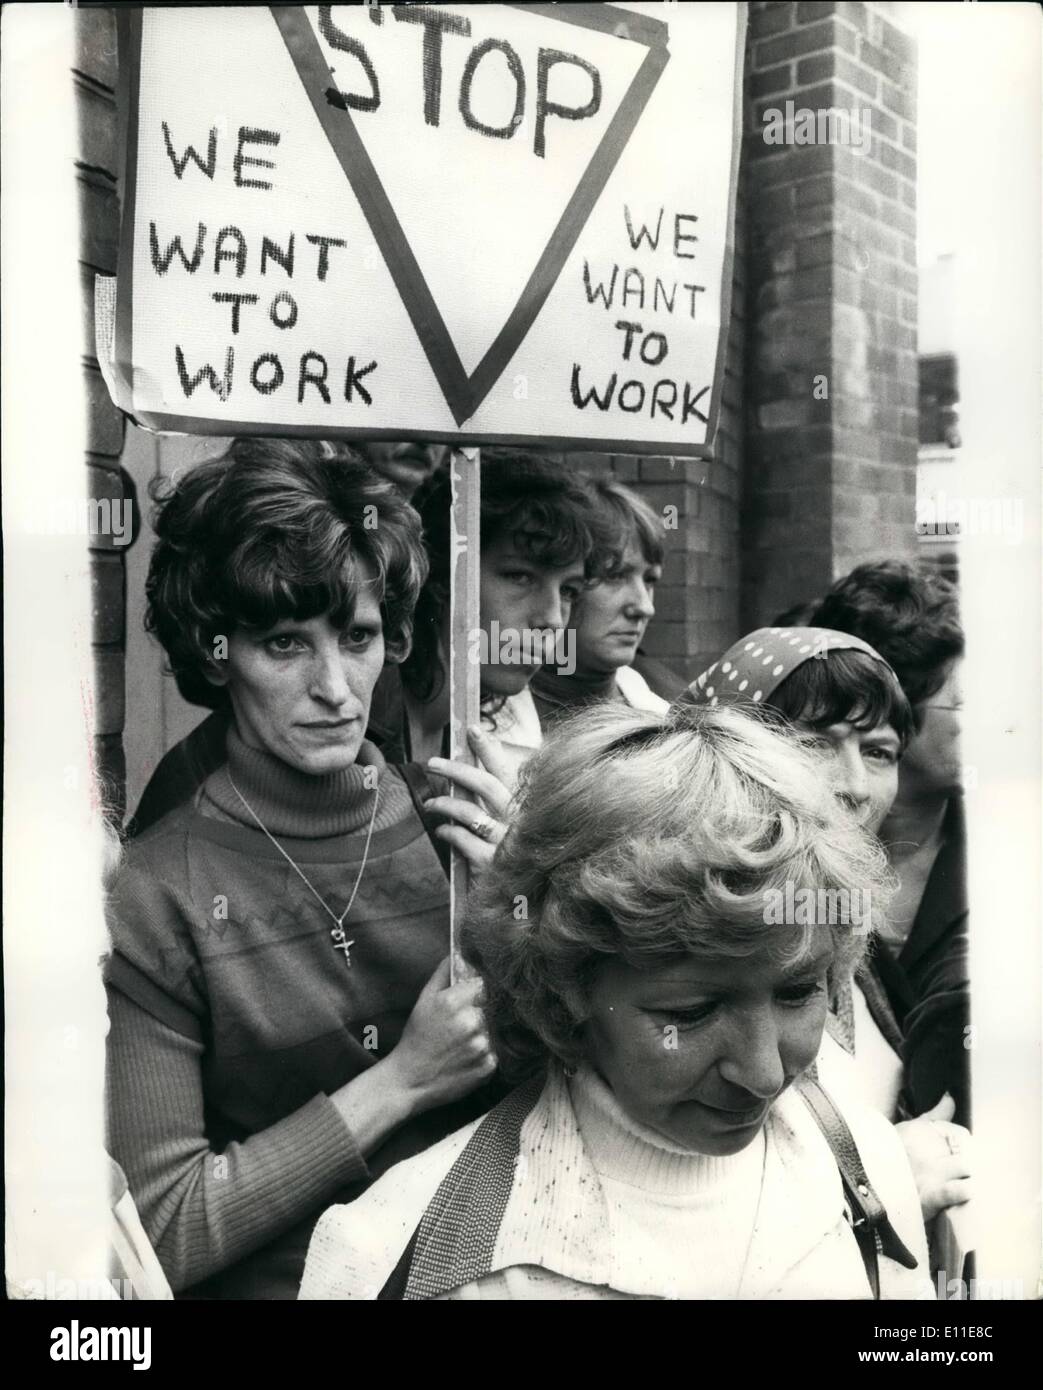 Sep. 09, 1977 - 'Let Us Work' Women Jostle Leaders Of The Lucas Strike: Women demanding an end to the nine week old strike by 1,300 tool makers at Lucas Birmingham, jostled shop stewards as they were leaving a Birmingham Social Club yesterday. Photo Shows Lucas women workers laid off by the nine-week old strike by toolmakers picketing the meeting the men's shop stewards yesterday. to press for a return to work. Mrs. Rosaleen Haskey (foreground was allowed to lead a group of six women into the meeting to state their views. Stock Photo